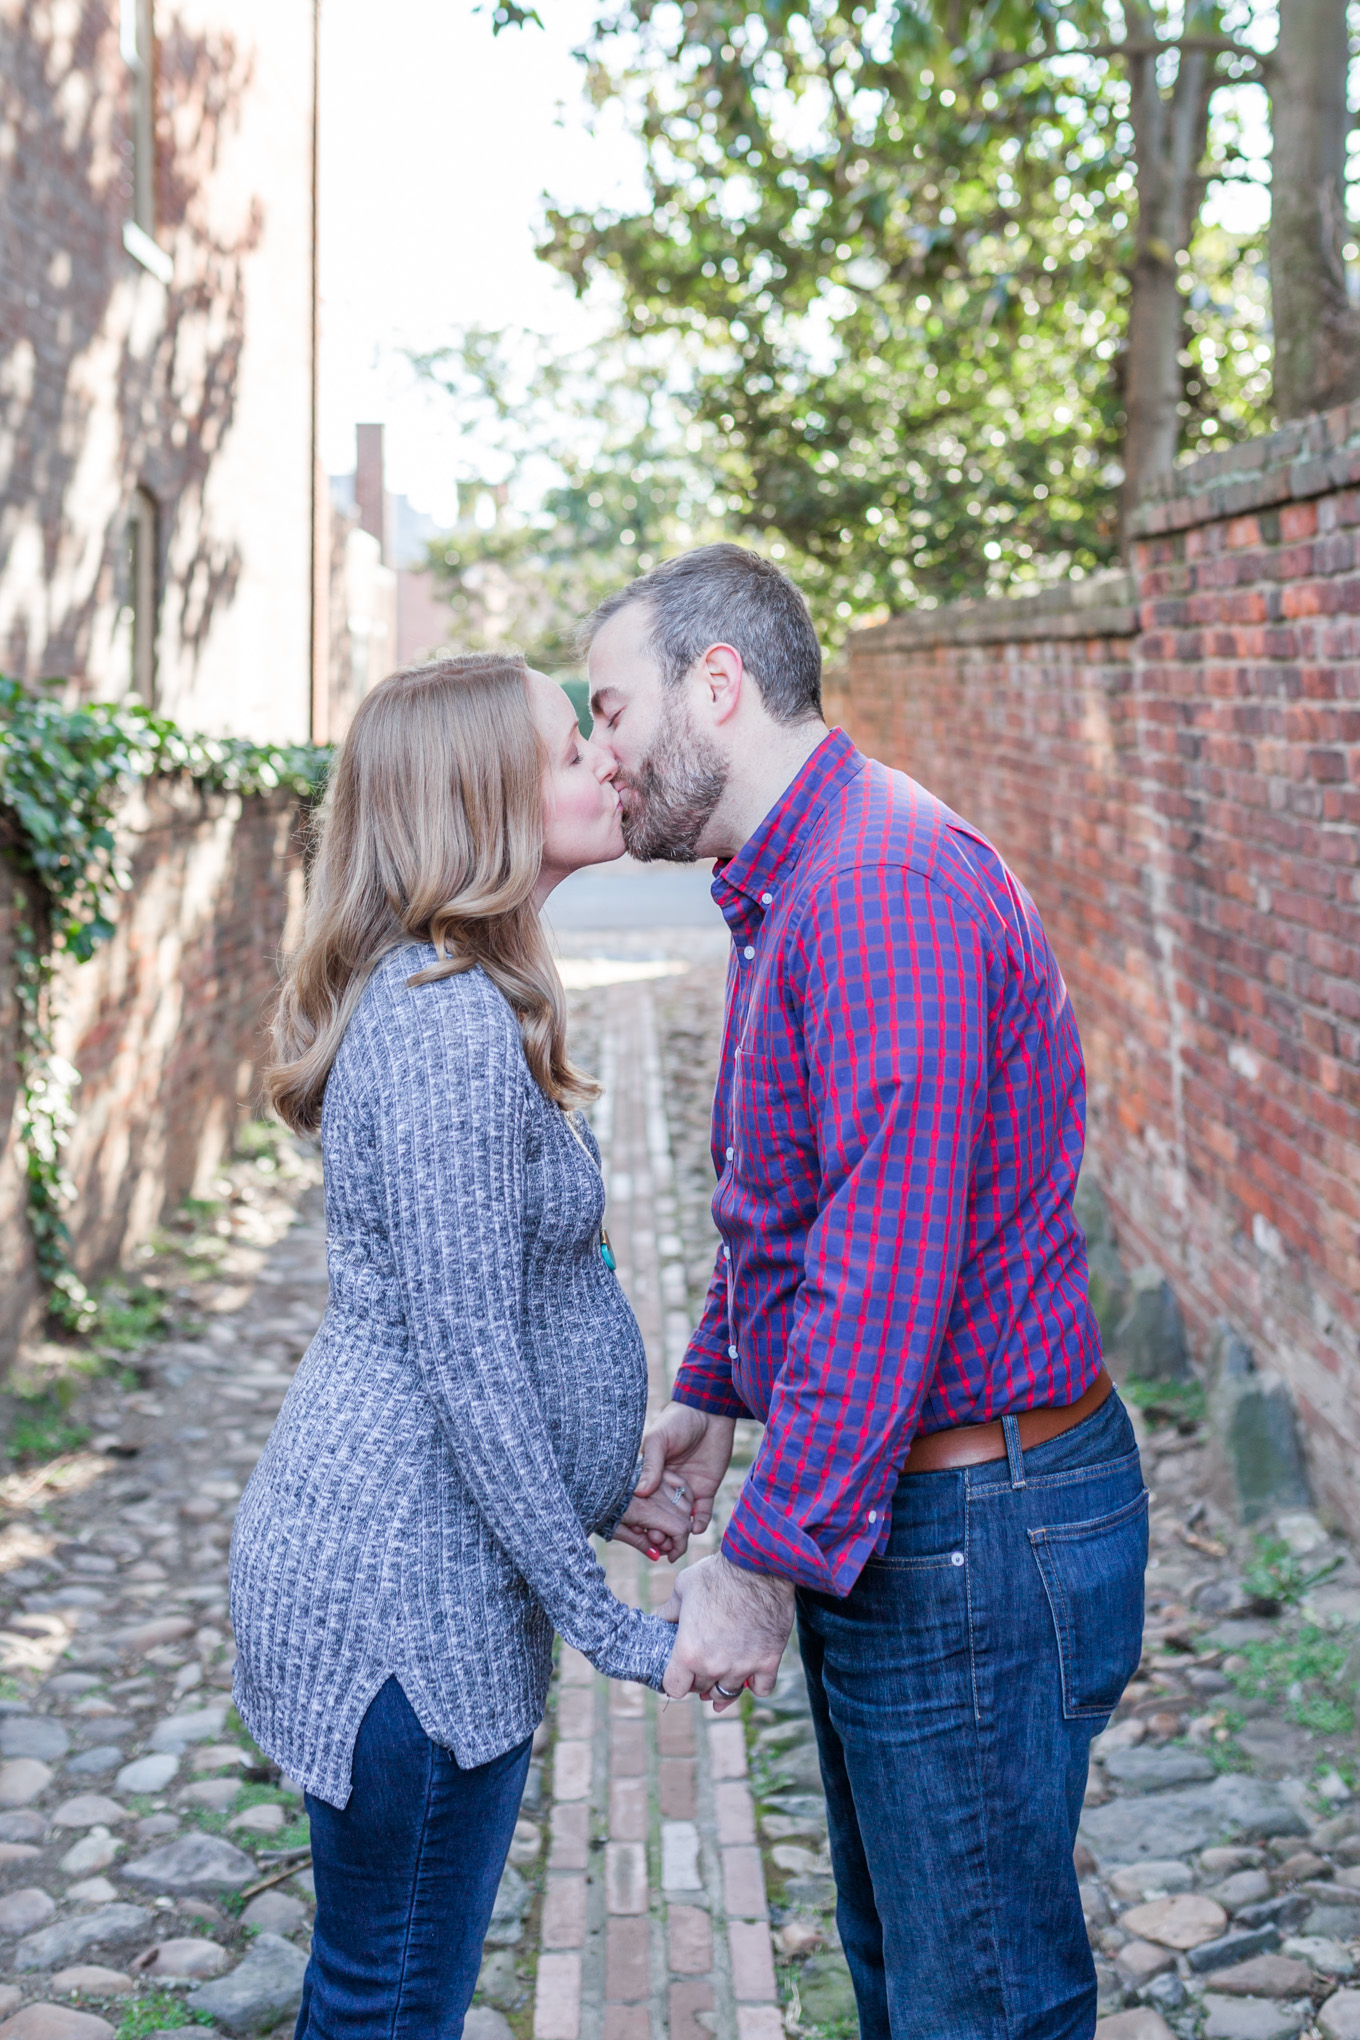 photo shoot style ideas, photo shoot style, photo shoot fashion, style ideas, style guide, photo shoot style guide, maternity photos, expecting couple, Alexandria, Old Town, kissing pic, Lee Street alley